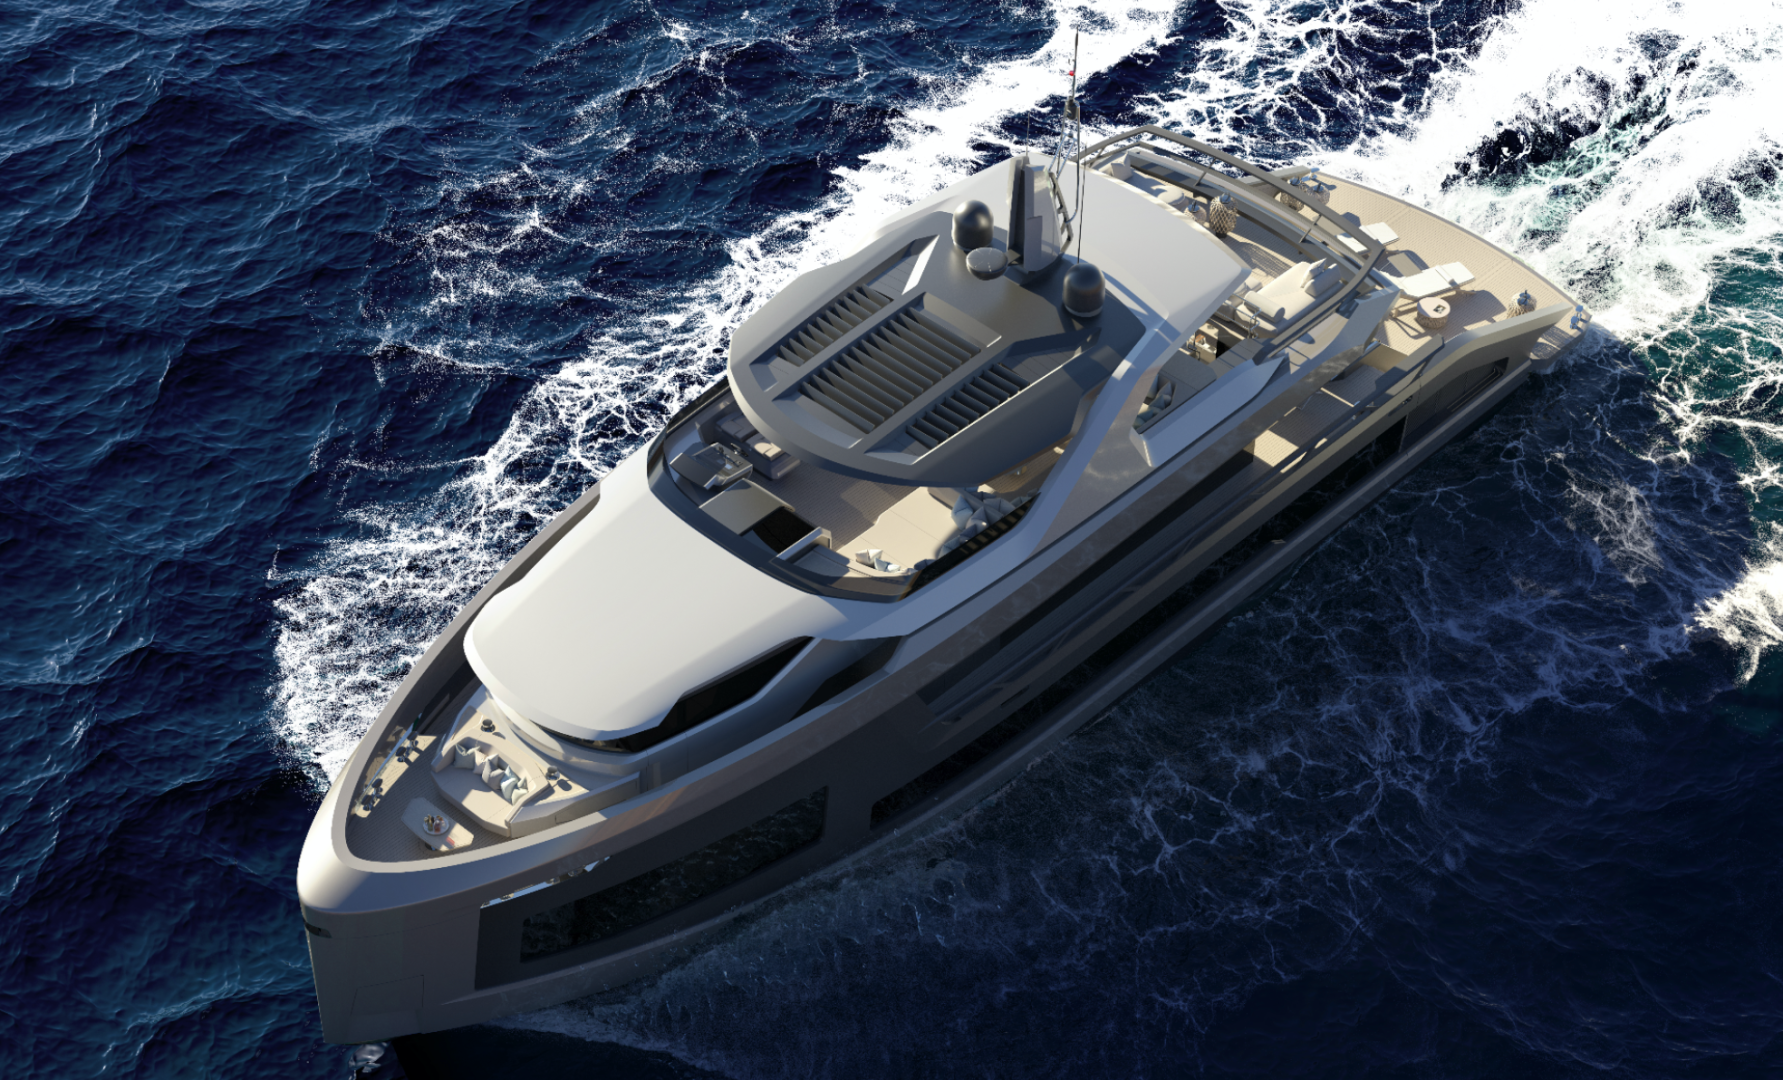 Mazu Yachts announces its entry into steel construction with the 92 DS